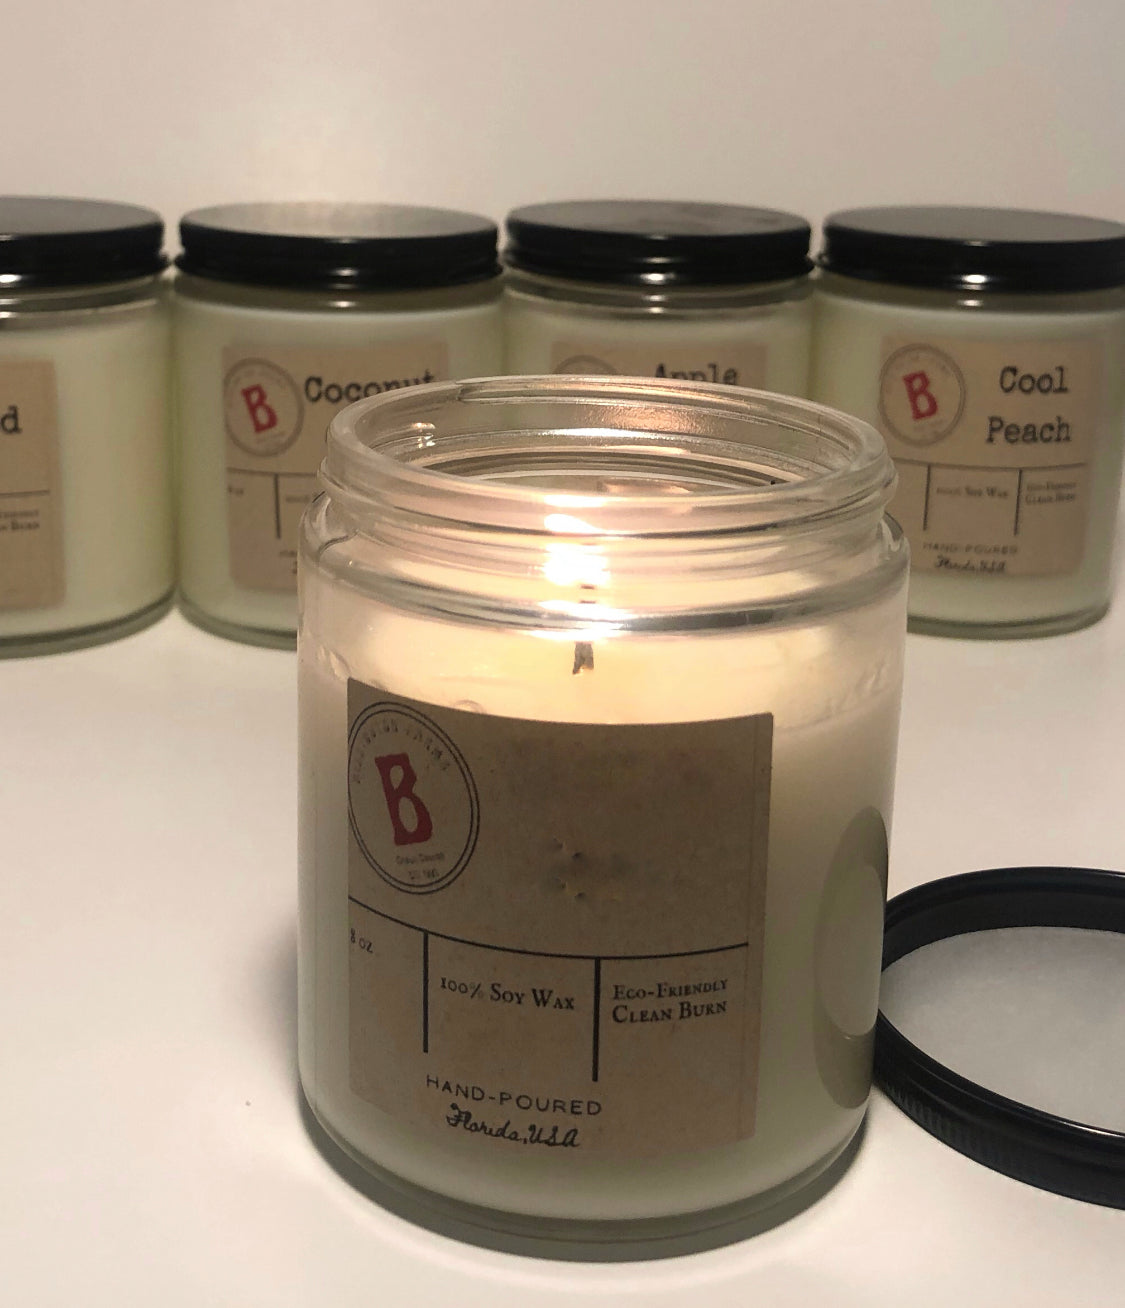 New Home Smell 100% Soy Wax Candles | Hand Poured